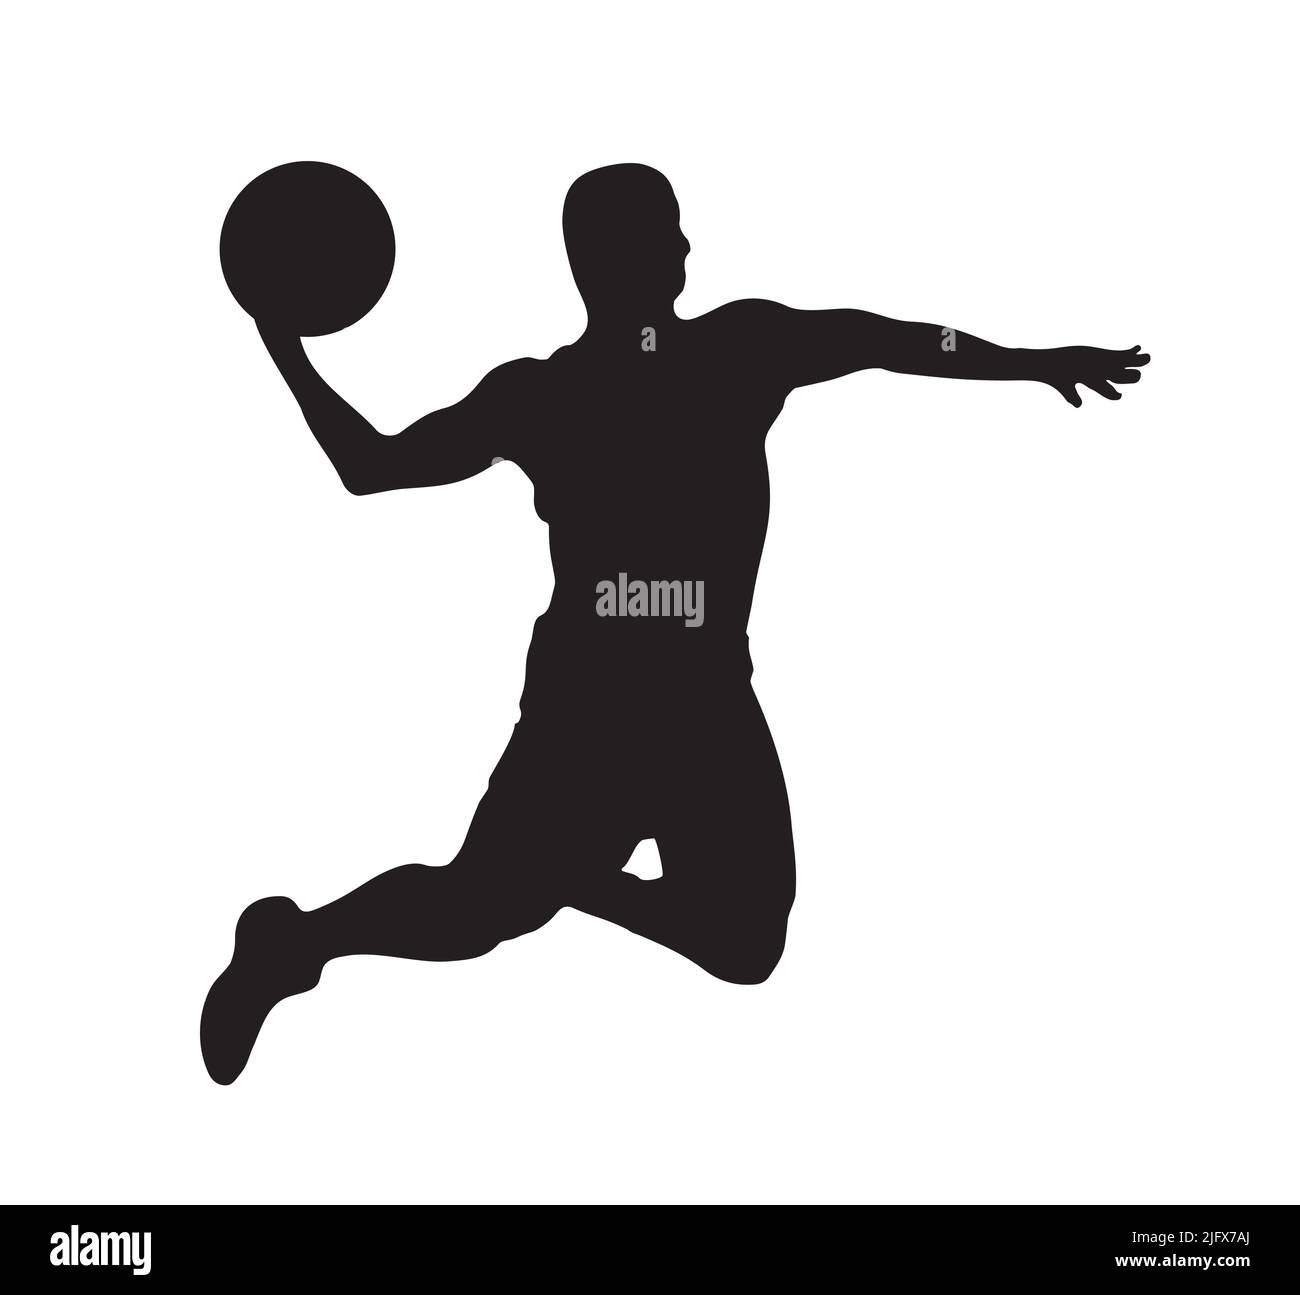 Basketball Young Player Jump Silhouette Figur Illustration Icon Sport Game Stock Vektor